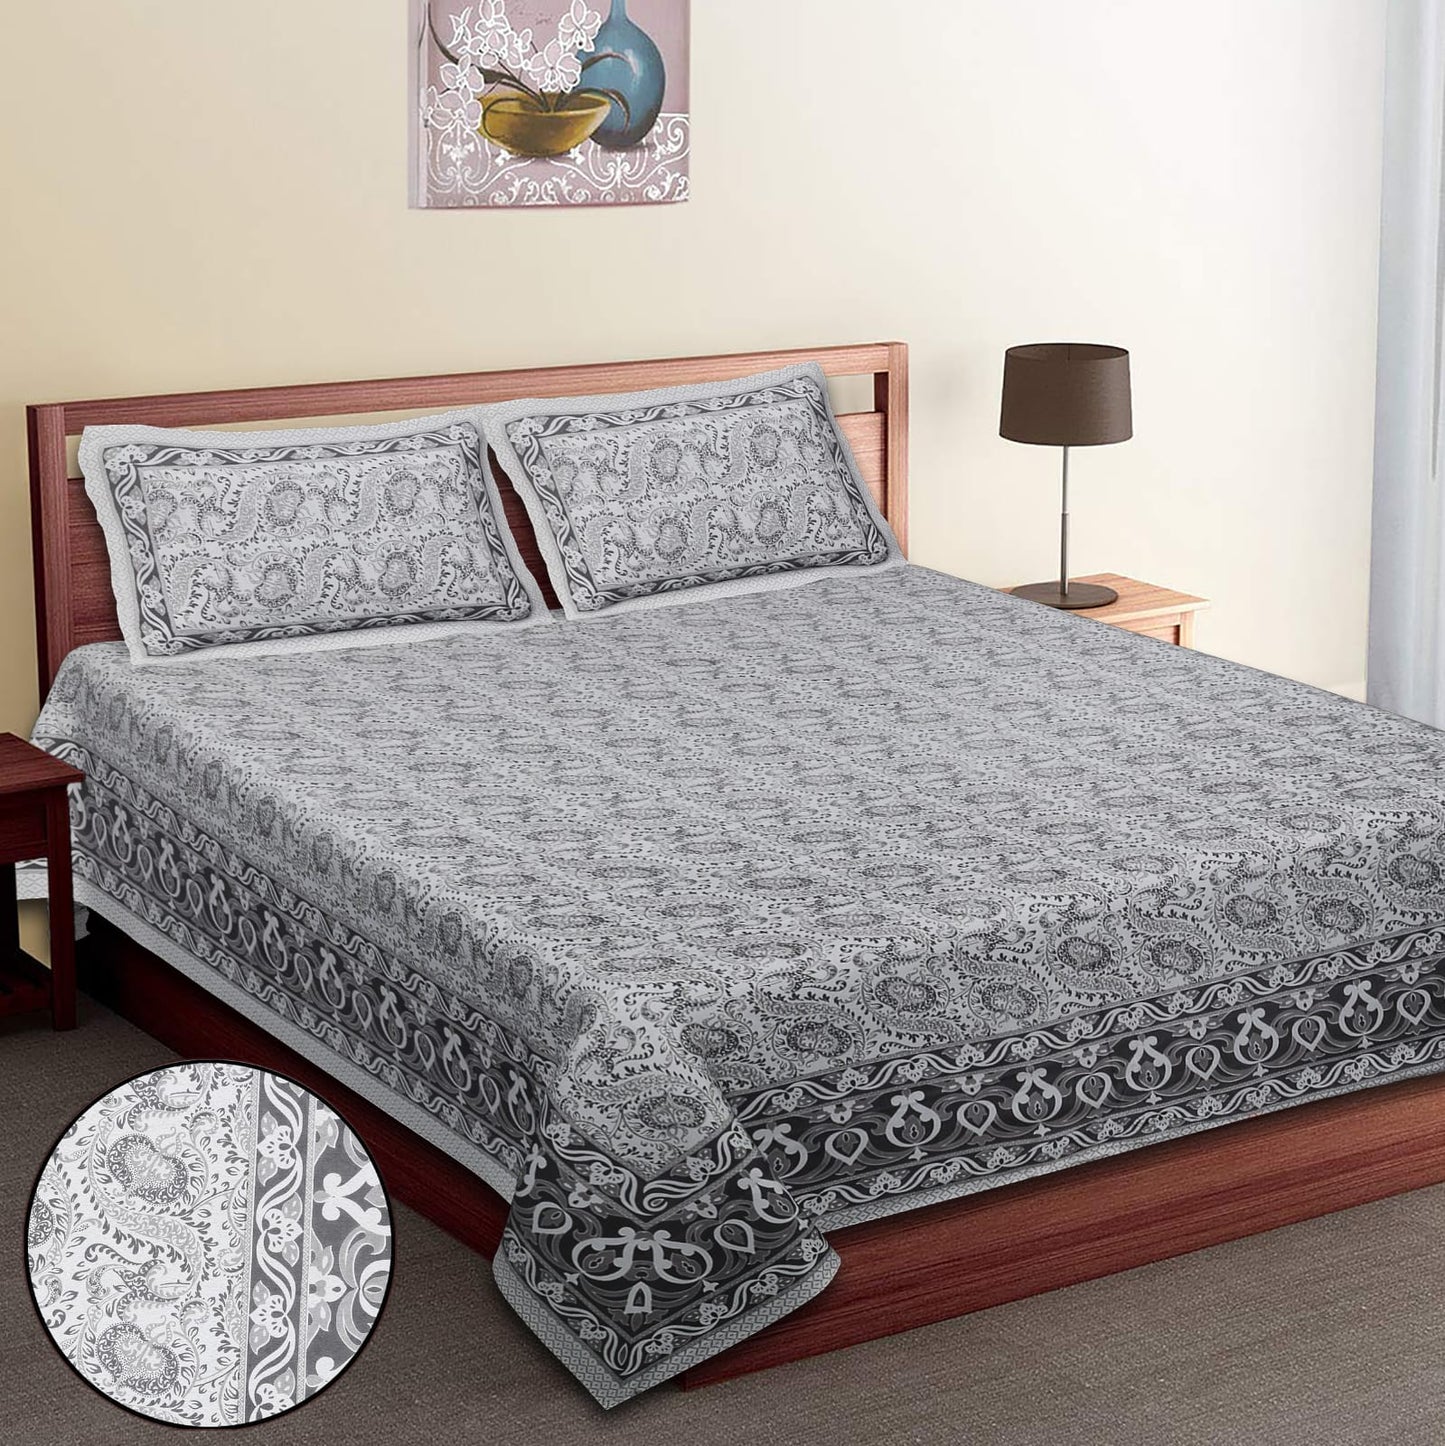 King-Size Cotton Bedsheet Set with Pillow Covers